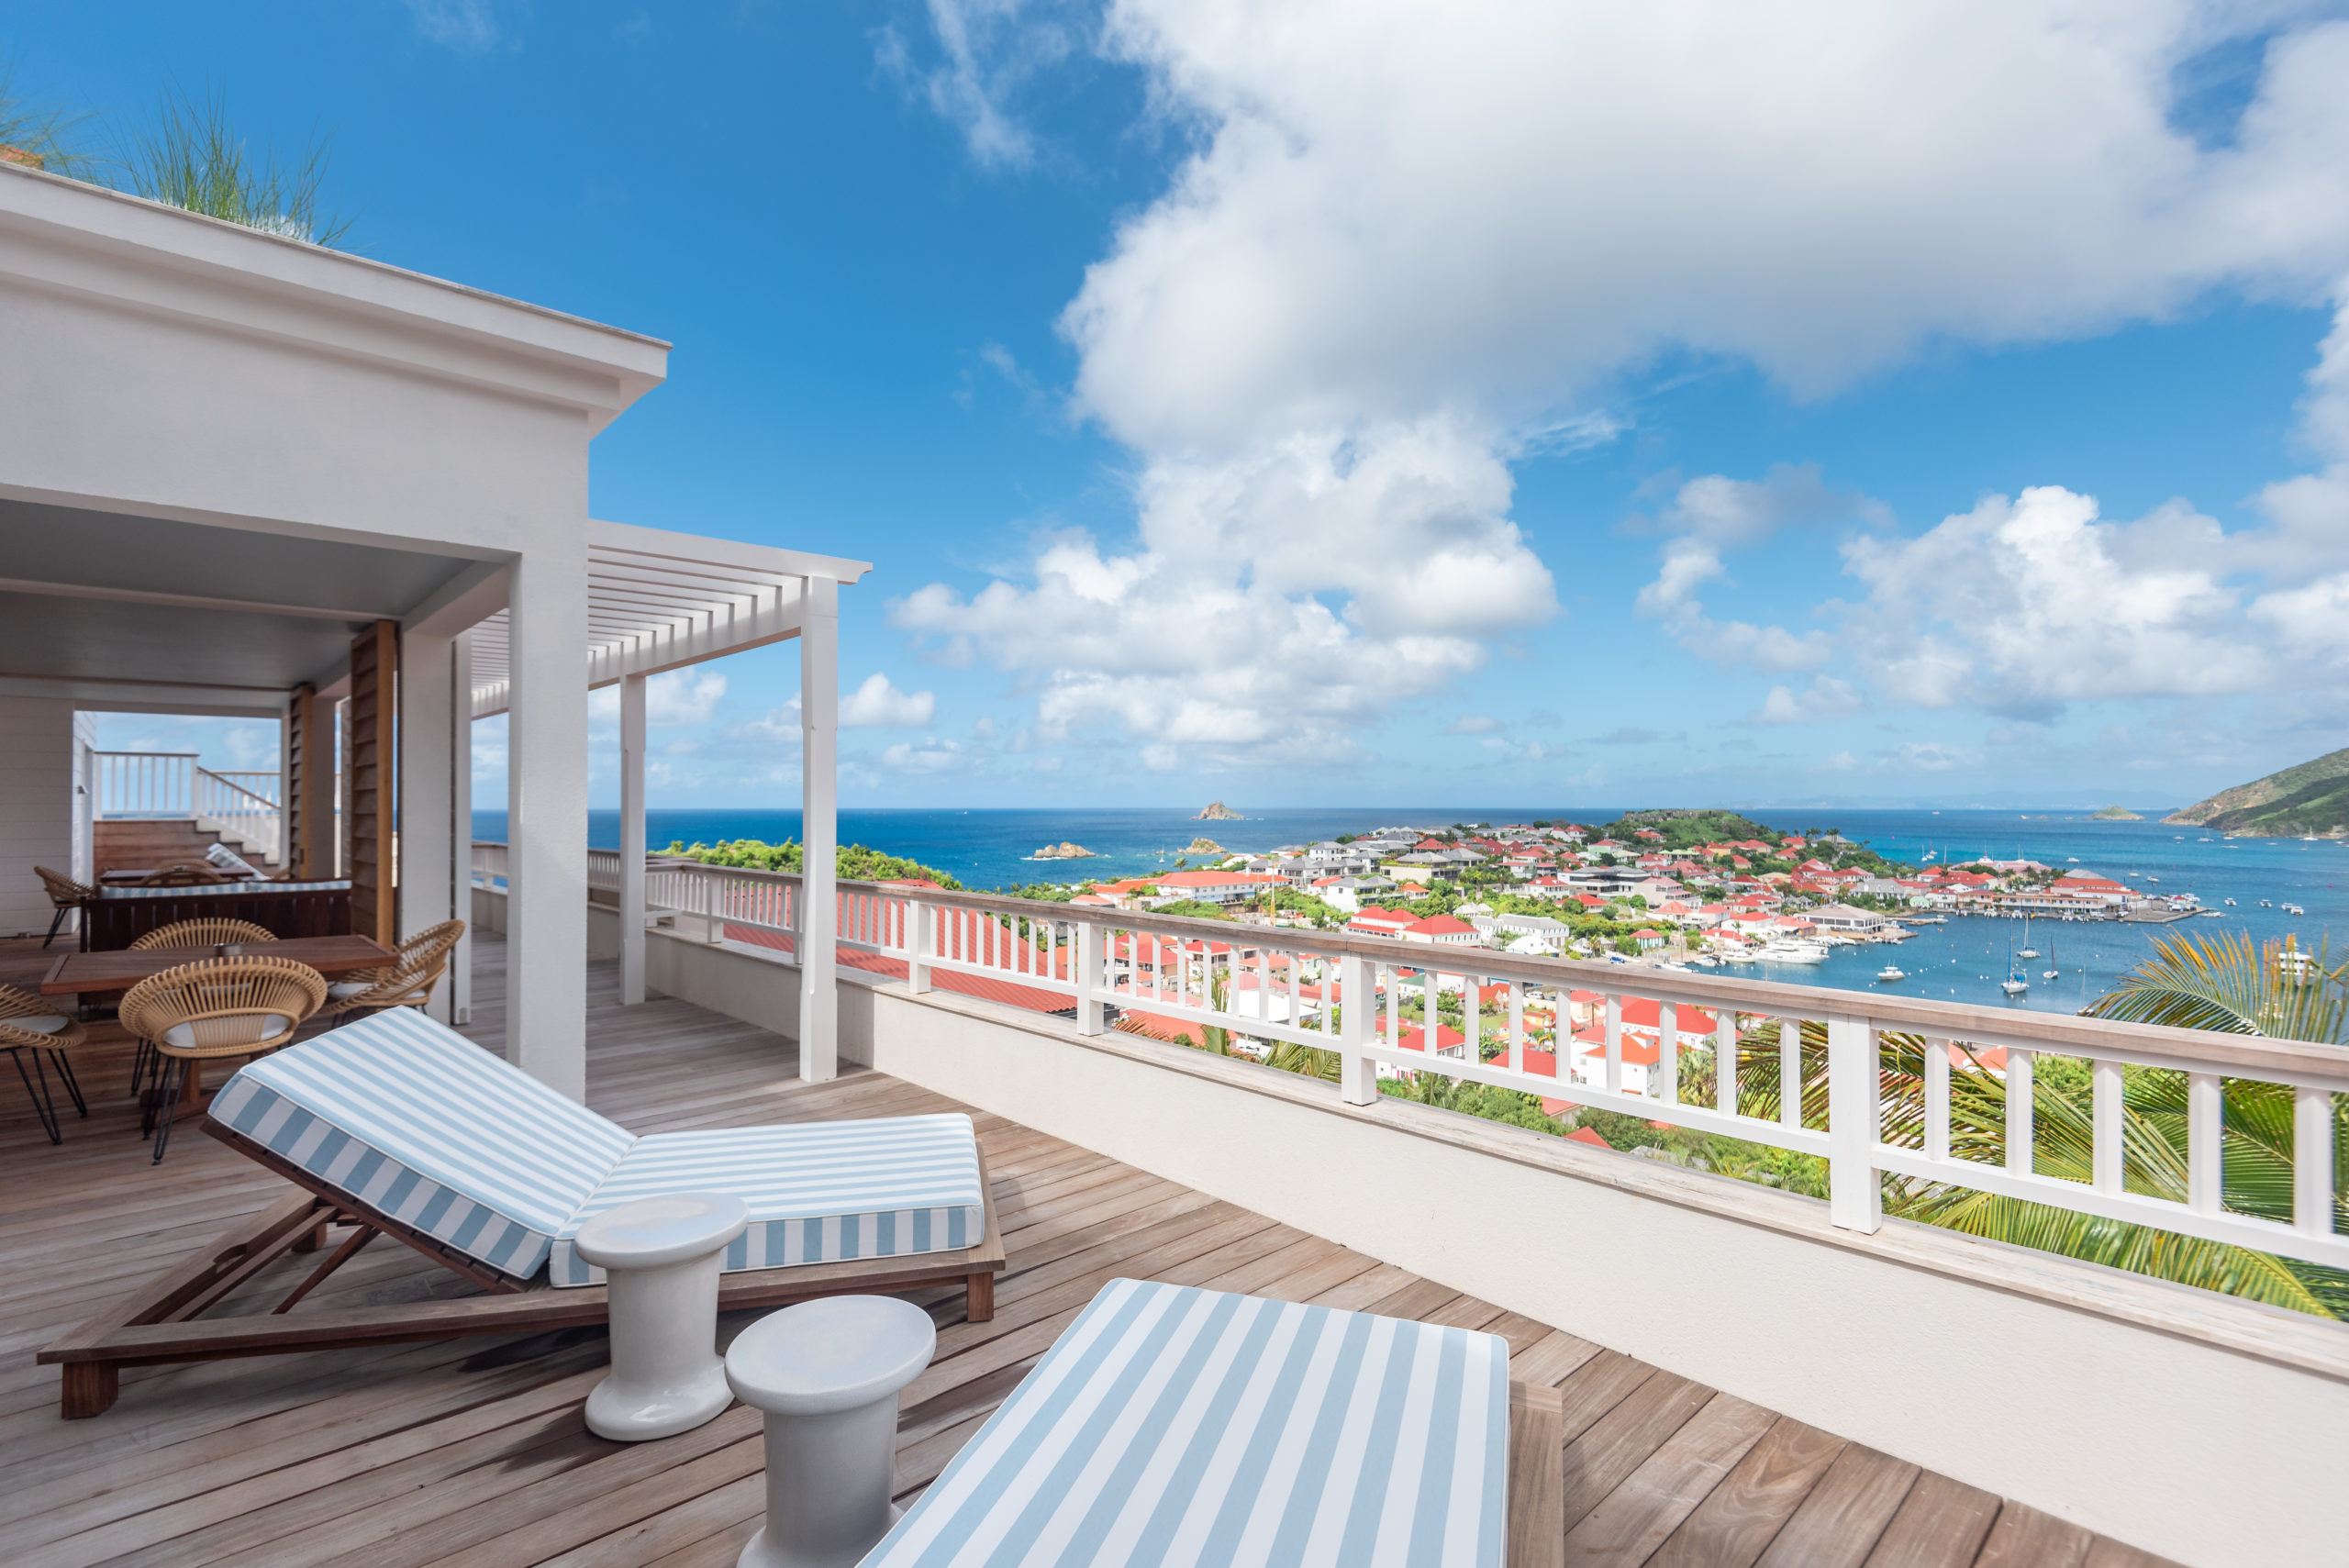 A Luxurious Escape to St. Barth’s: Experiencing Hôtel Barrière Le Carl Gustaf